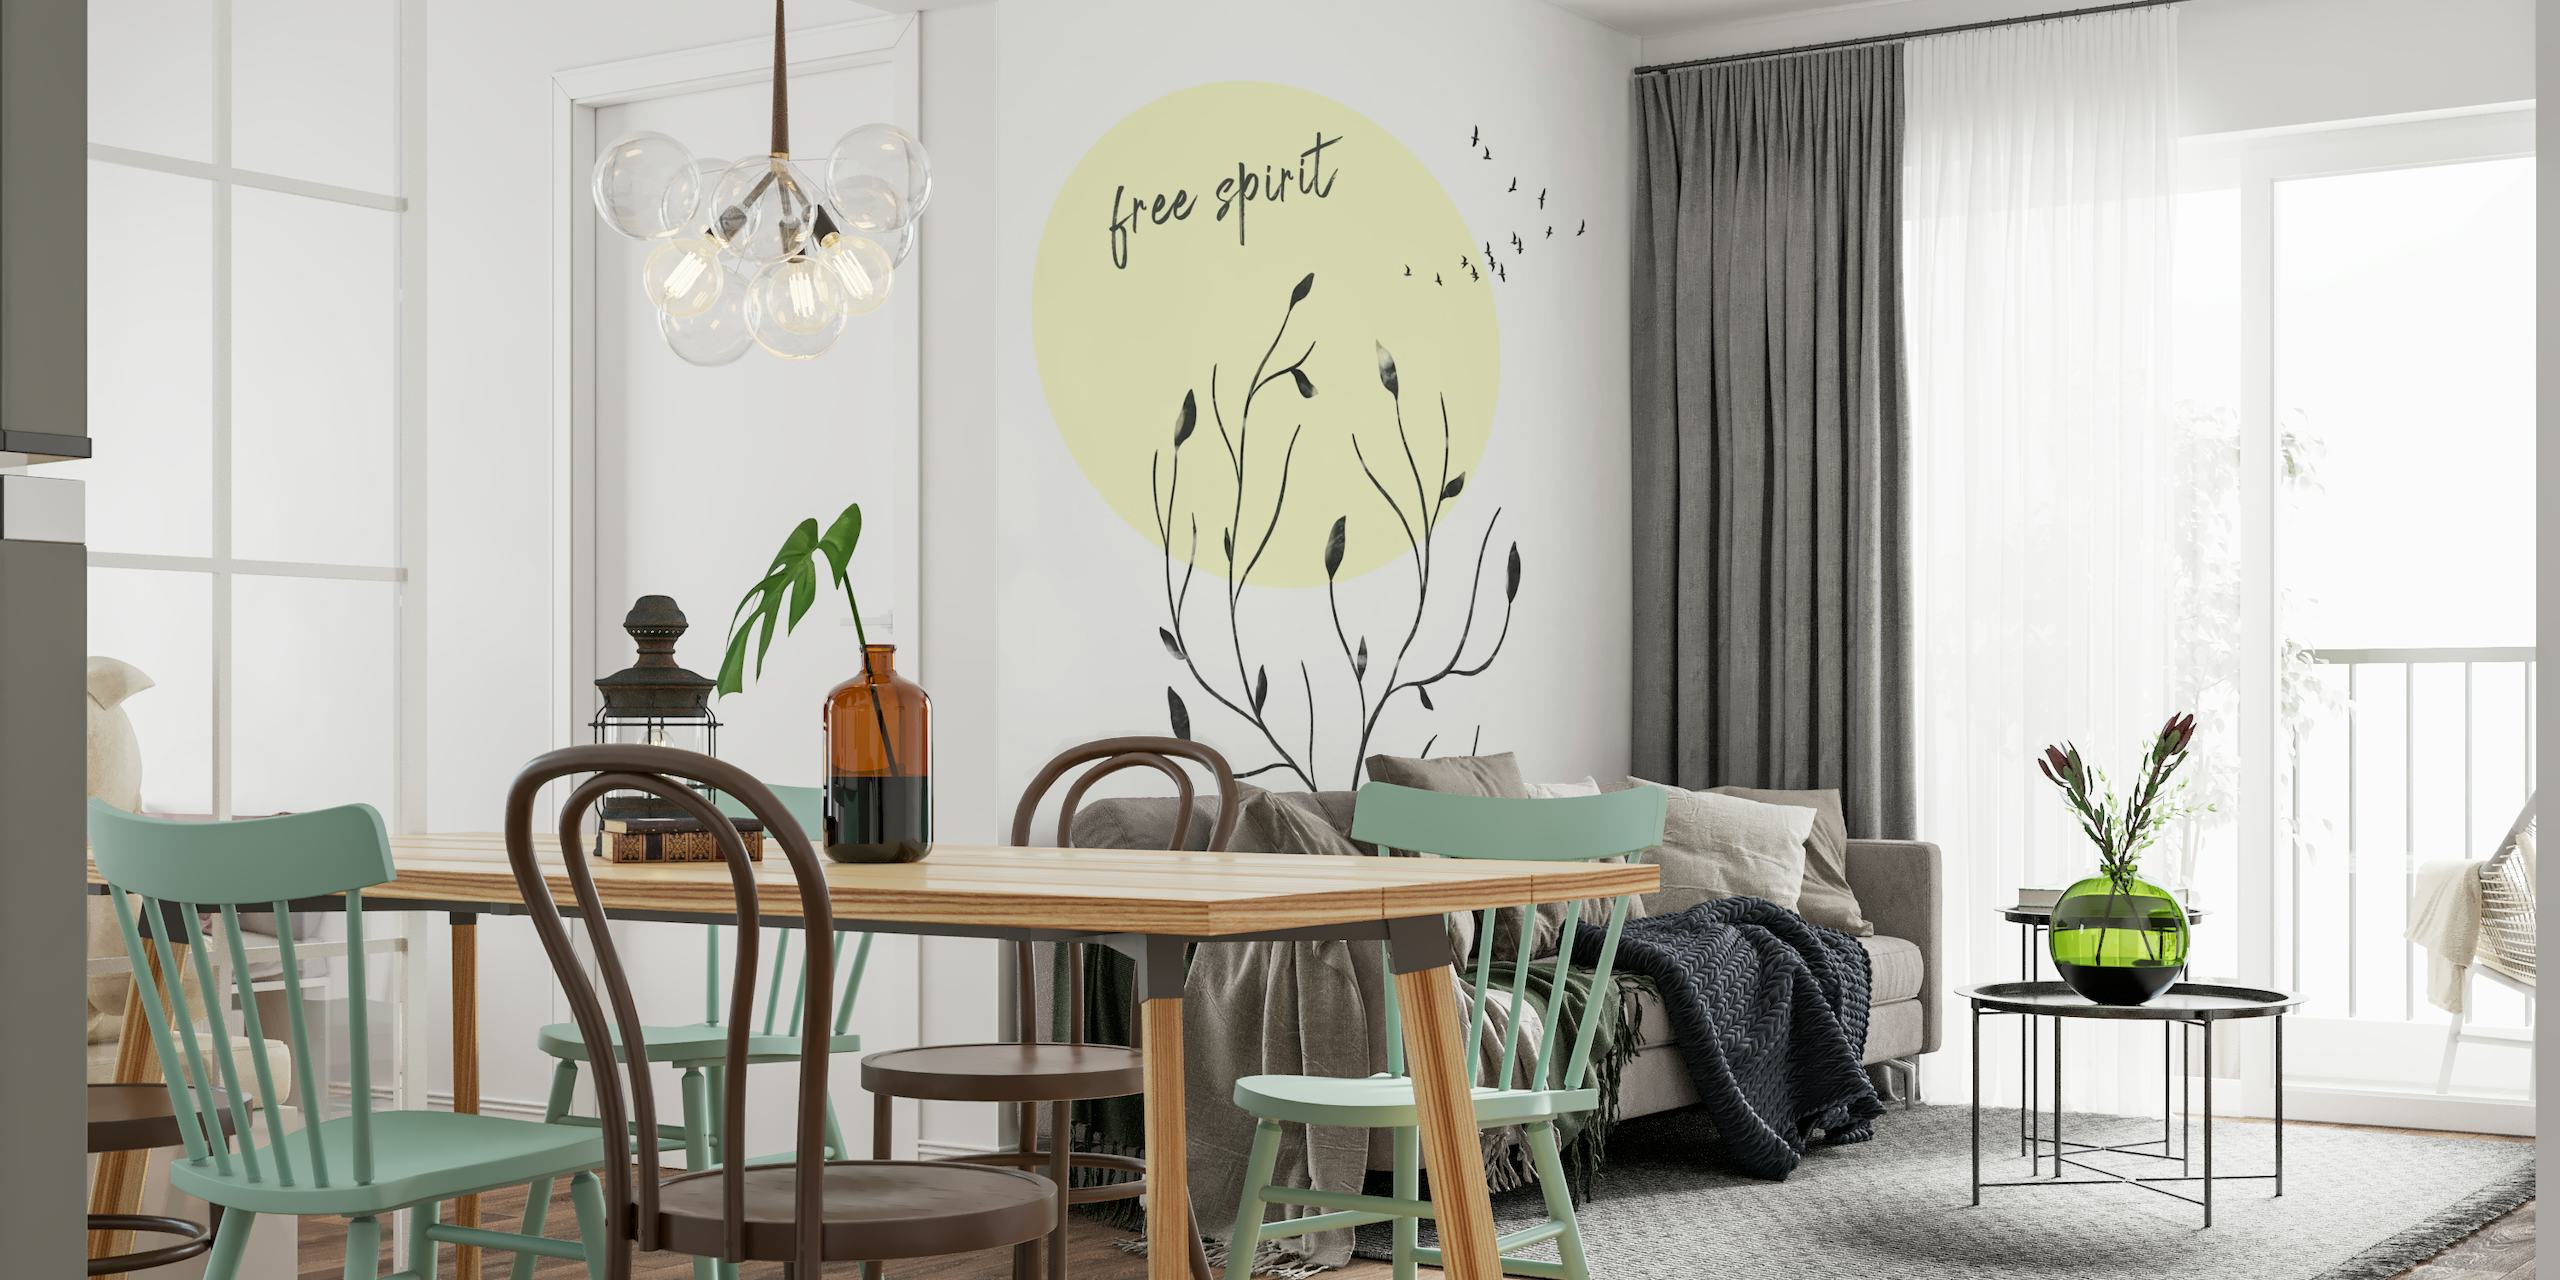 Minimalist 'Free Spirit' wall mural with botanical silhouettes and text, in cream and black with a yellow circle